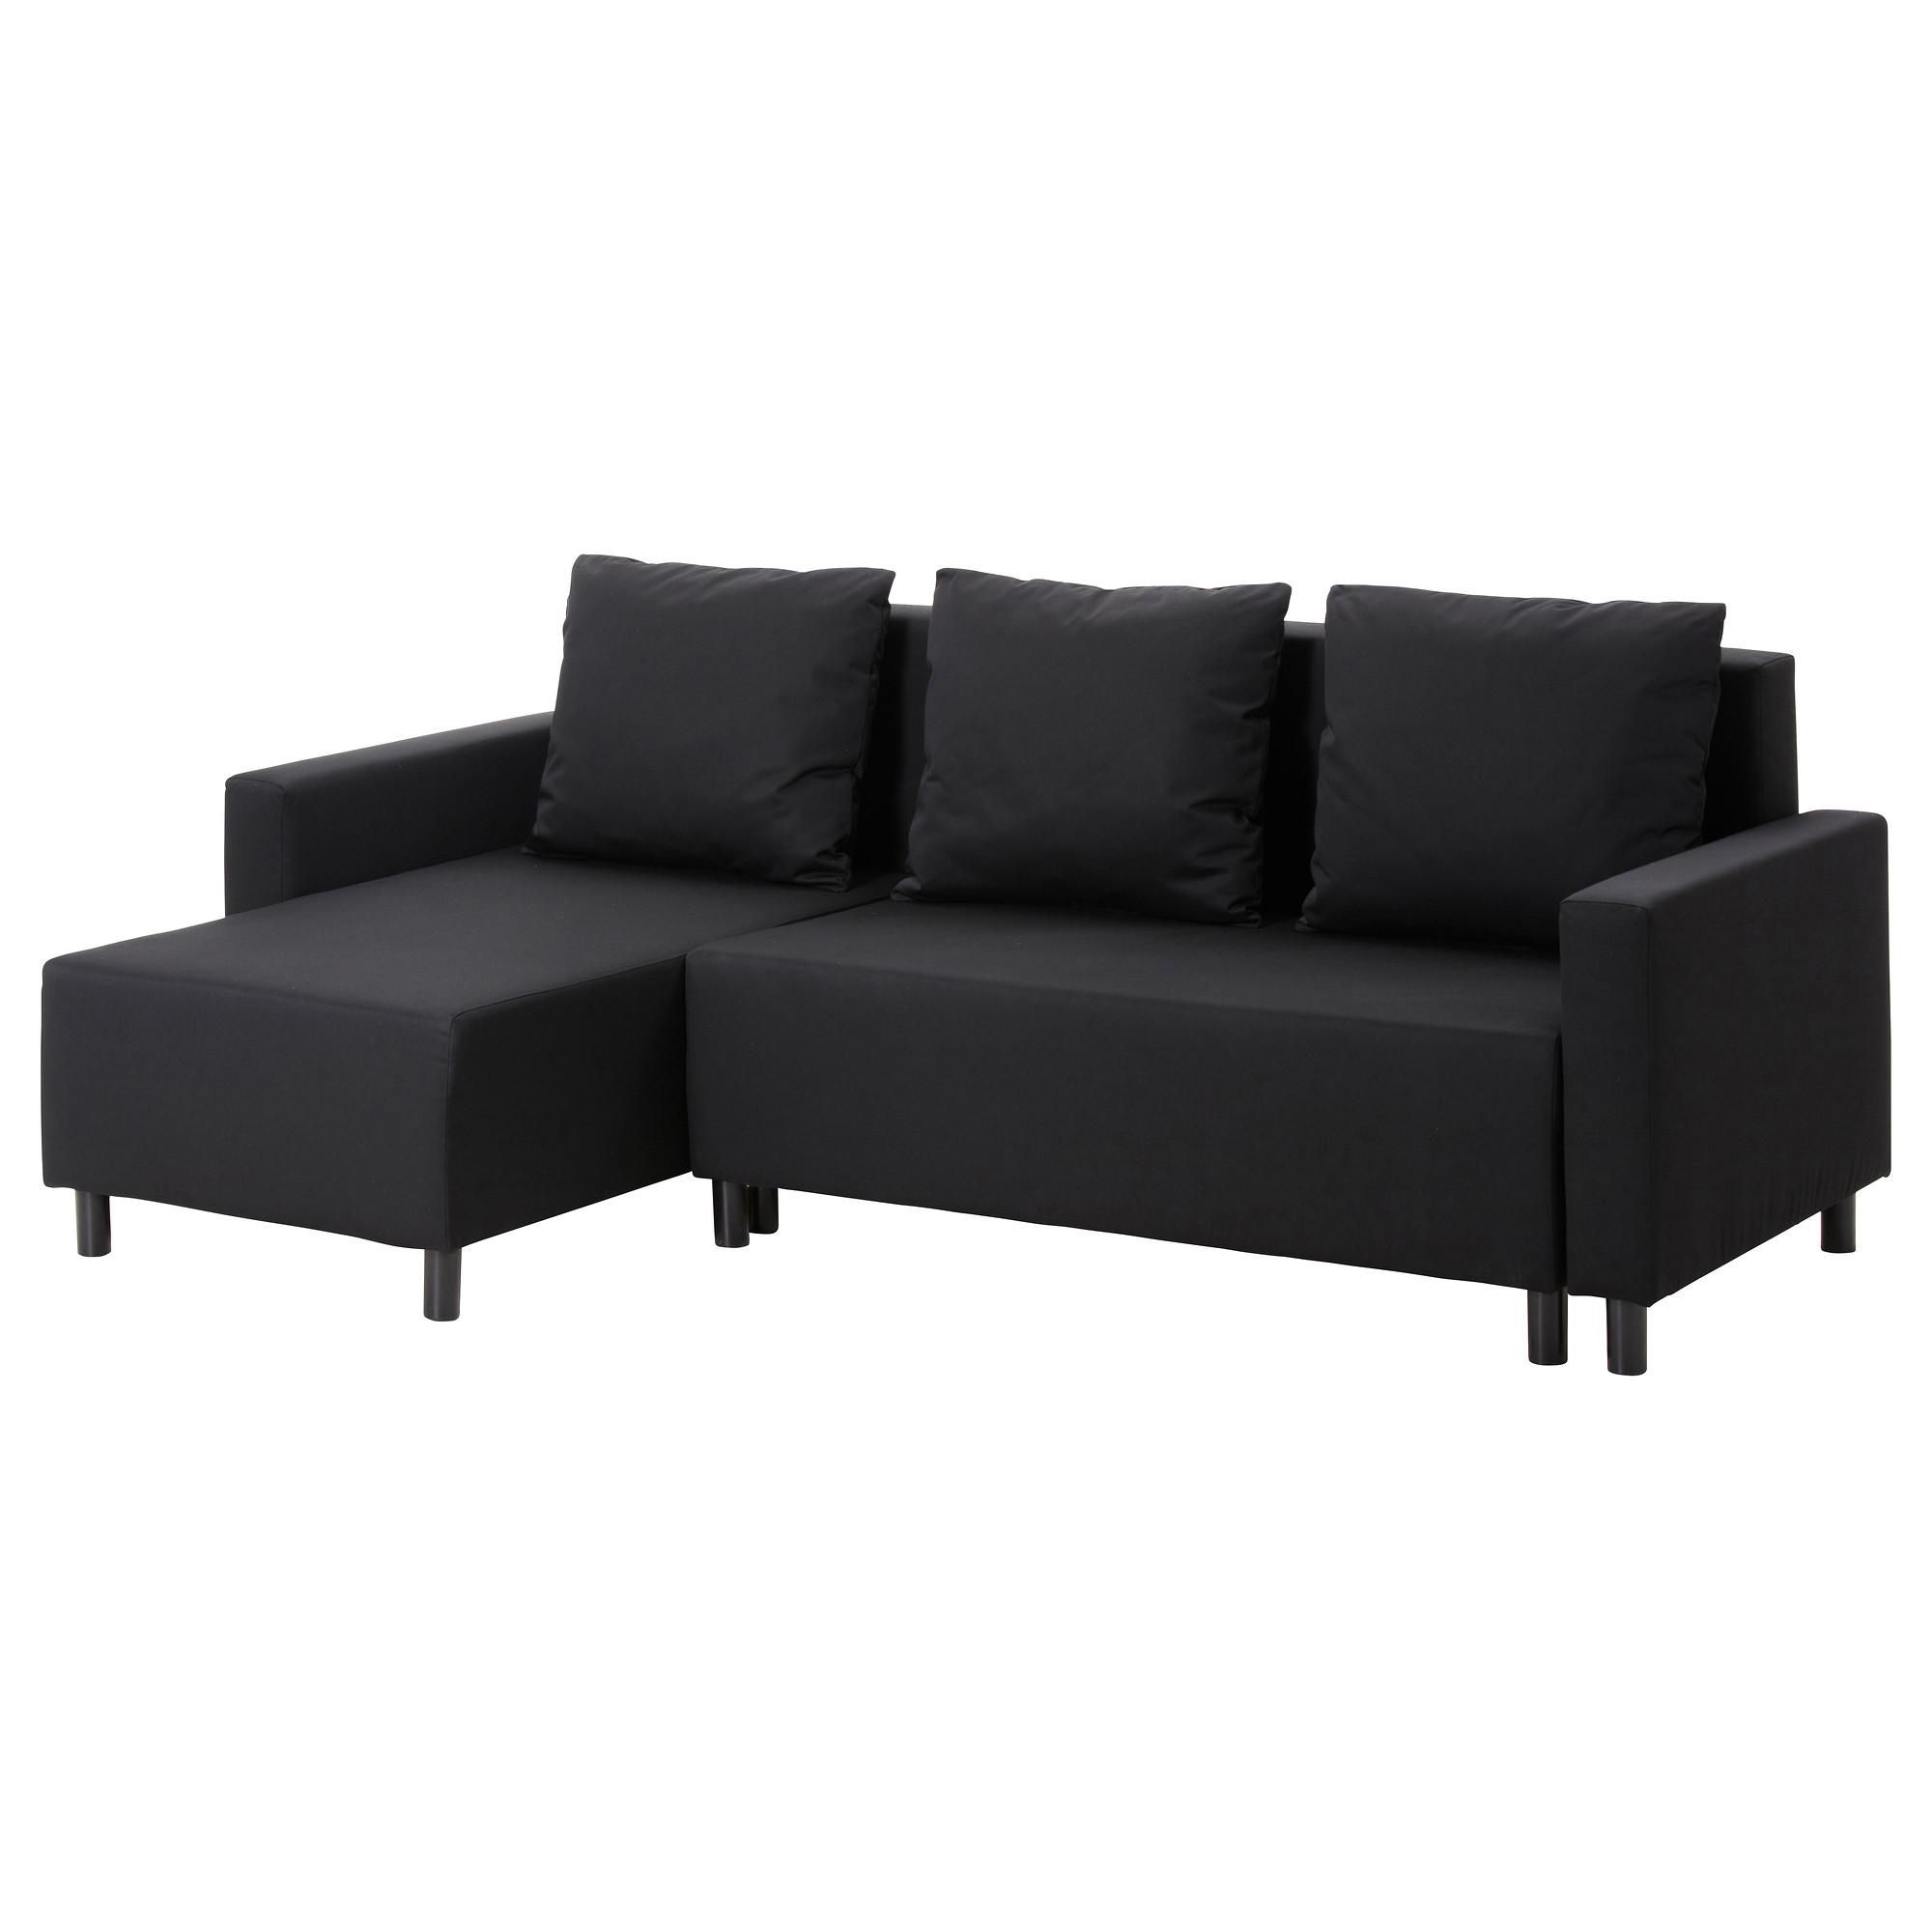 Lugnvik Sofa Bed With Chaise Longue Granån Black – Ikea Throughout Chaise Longue Sofa Beds (View 16 of 20)